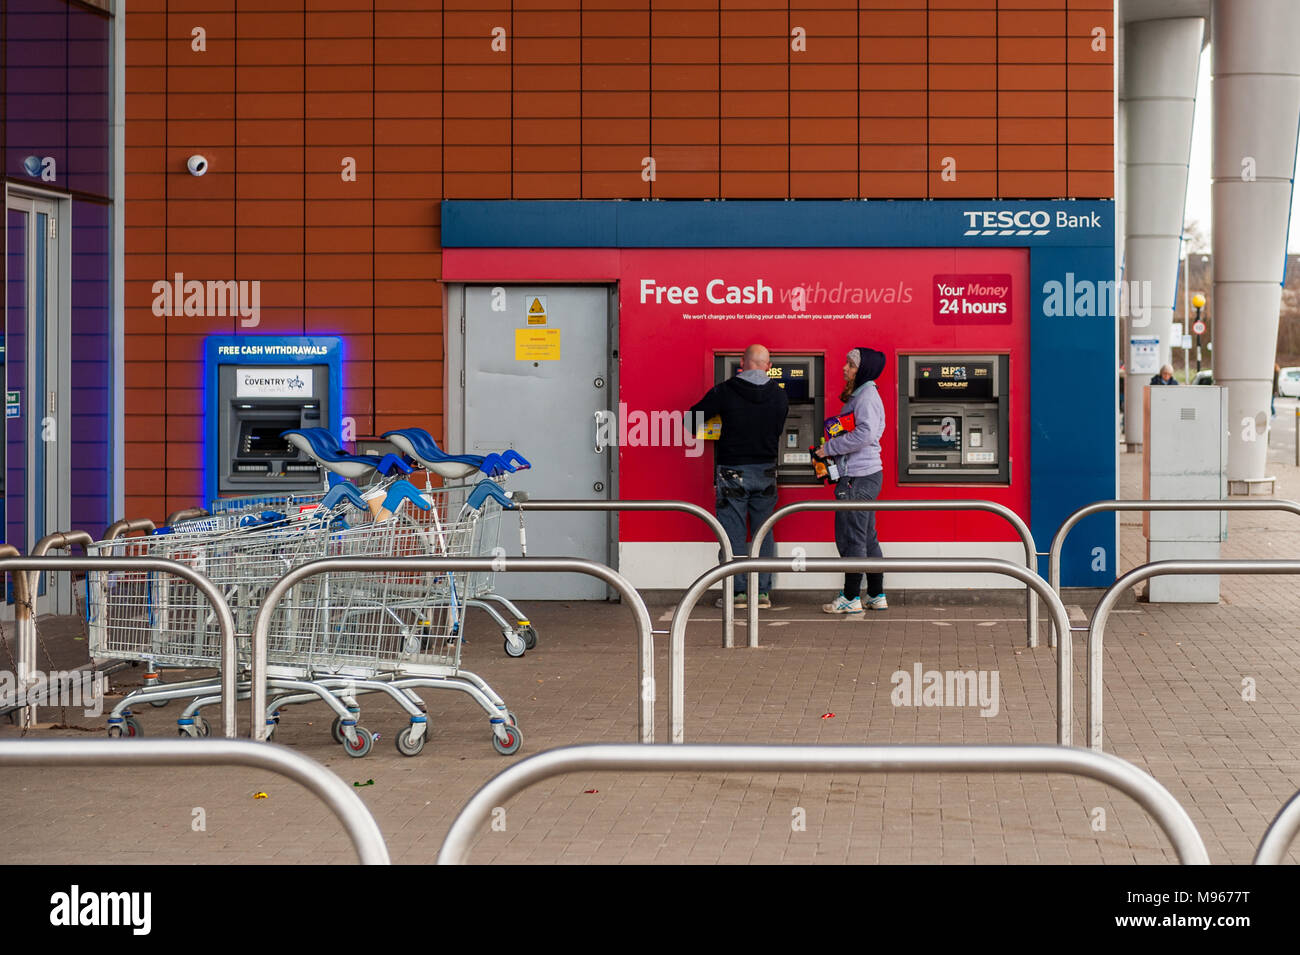 People withdrawing money from a Tesco ATM in Arena Retail Park, Coventry, West Midlands, UK. Stock Photo